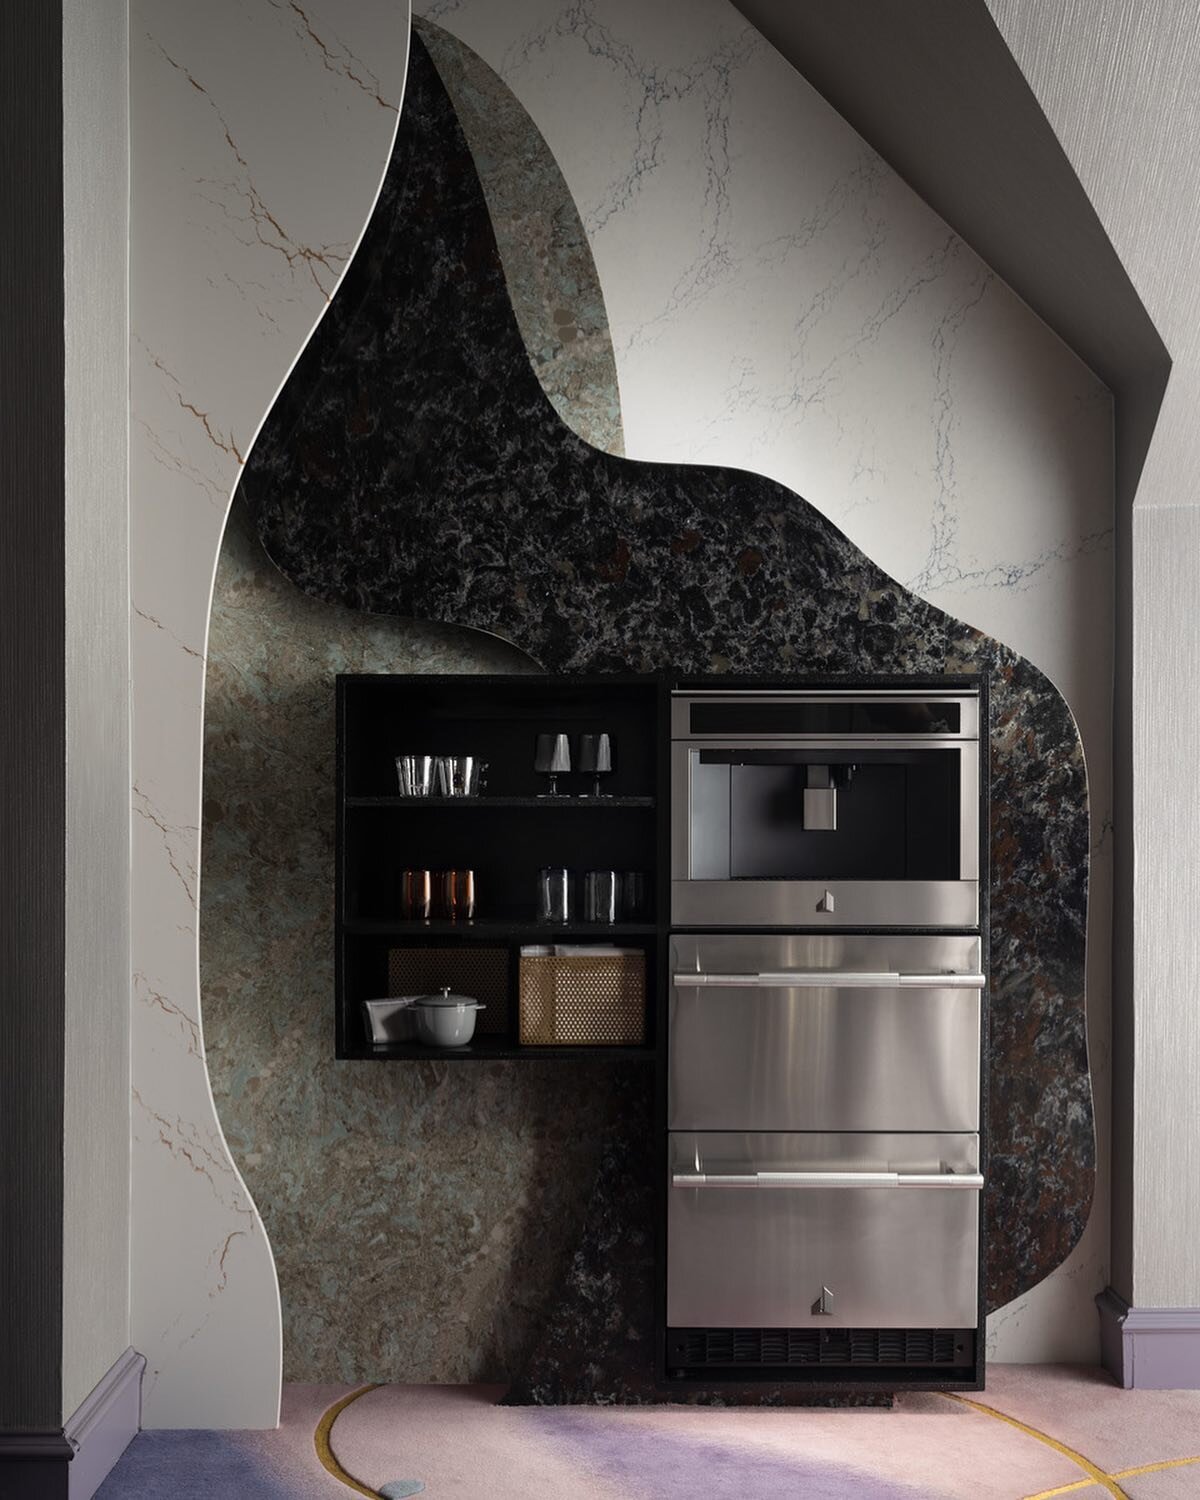 How are you drinking your coffee this morning? ☕️

@verandamag spoke with designer @ahmad.abouzanat about some unexpected ways to use stone in your home including this indulgent @jennair coffee bar installation with 4 different curved layers of @camb